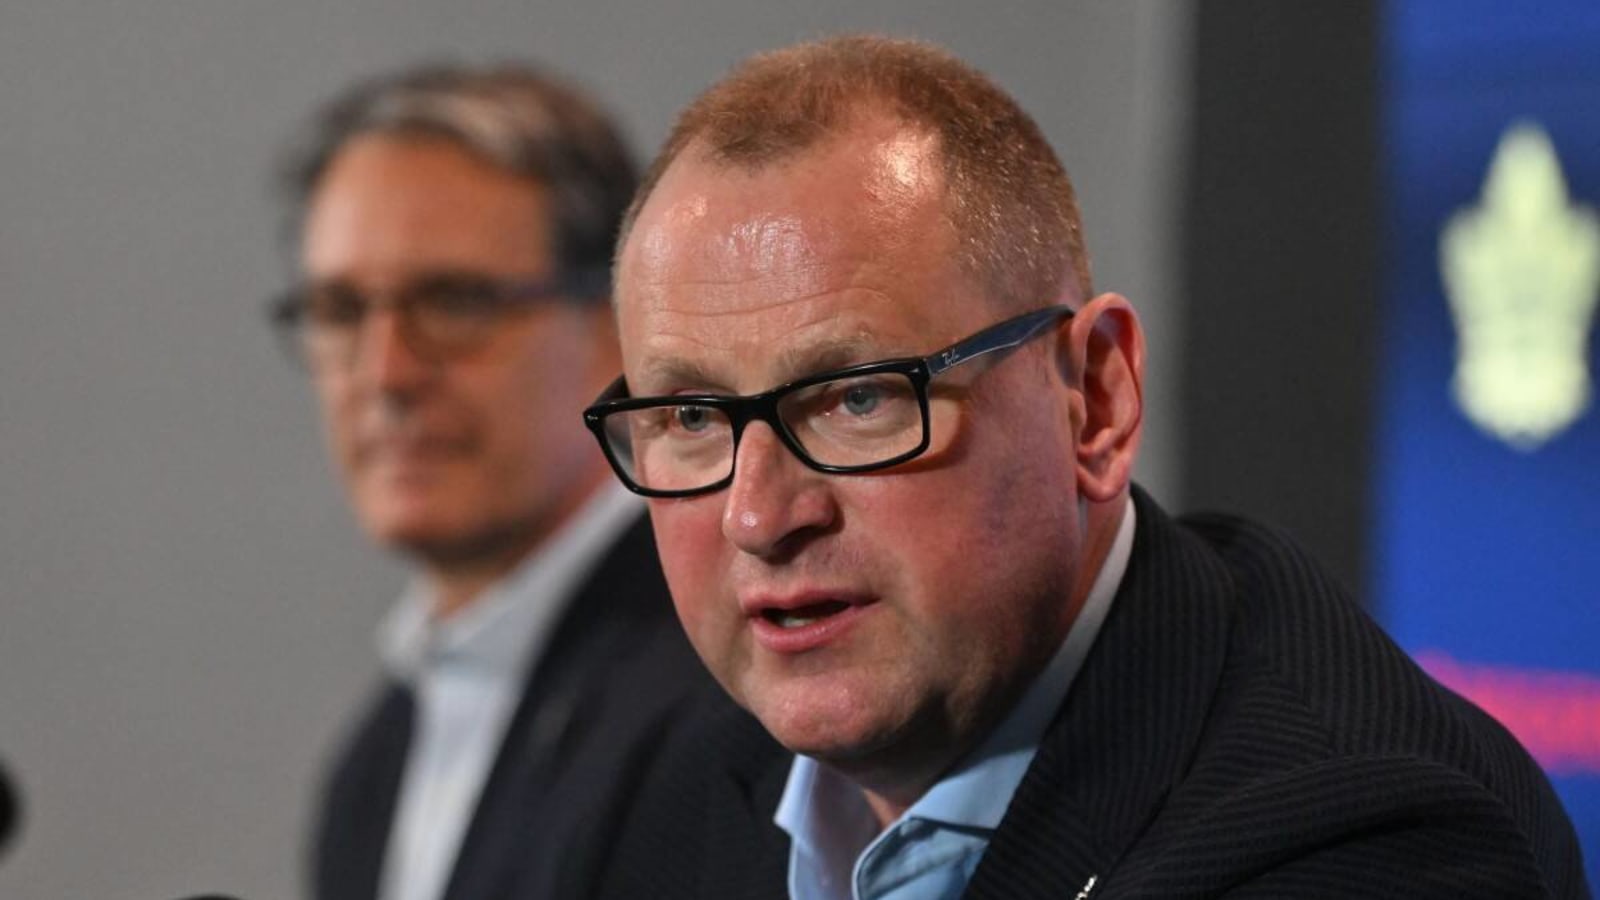 Maple LeaMaple Leafs GM Brad Treliving Willing to Move First-Round Pick &#39;If It Makes Sense&#39; Between Now and NHL Trade Deadlinefs GM Brad Treliving Willing to Move First-Round Pick &#39;If It Makes Sense&#39; Between Now and Trade Deadline